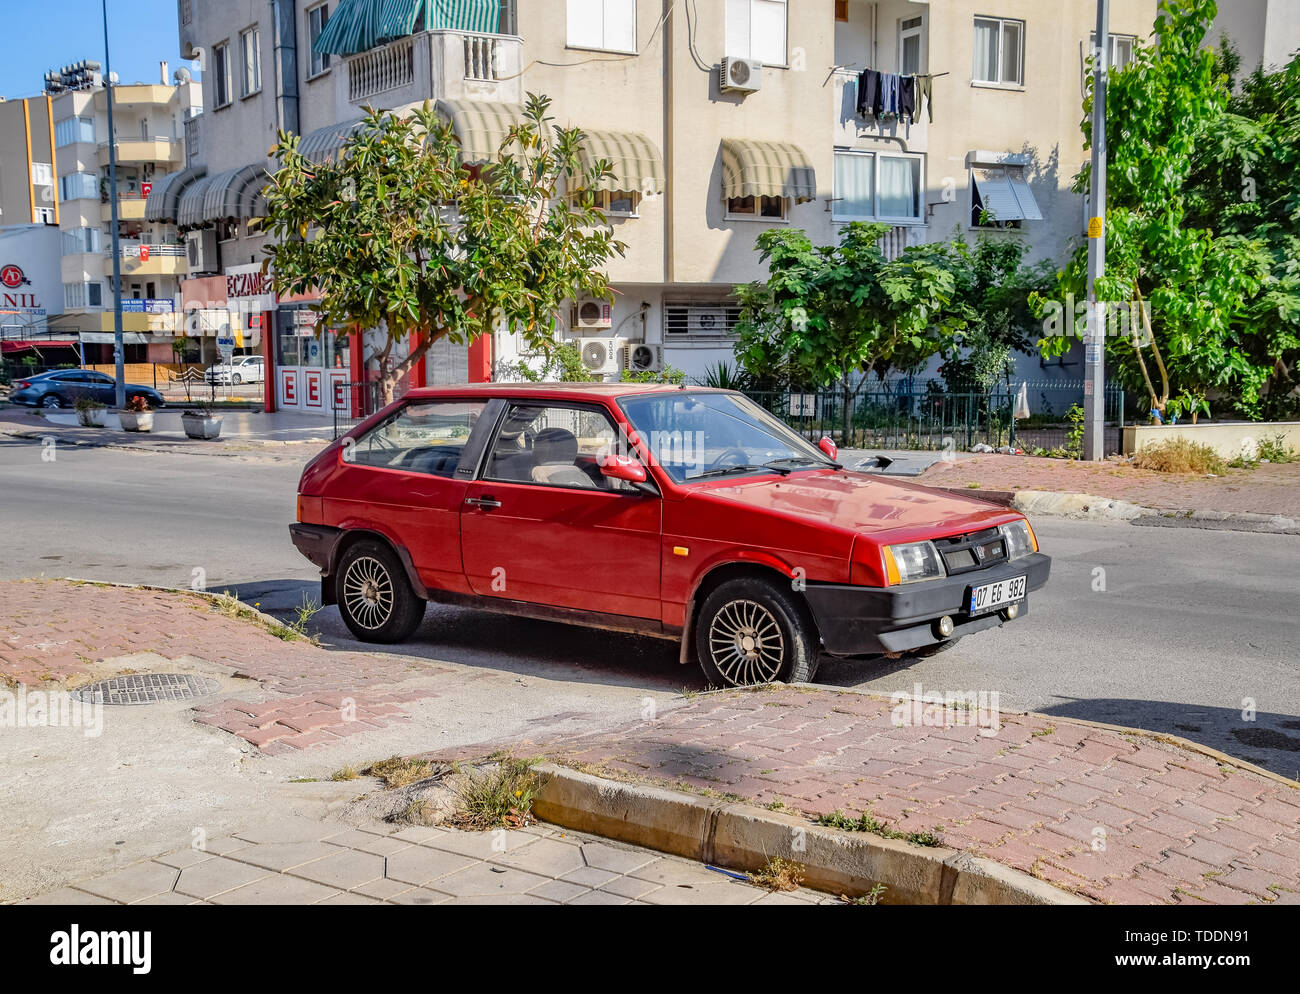 Antalya, Turkey - May 19, 2019: Car Lada 2108. Eight, people's youth car stands on the street in Antalya. Stock Photo